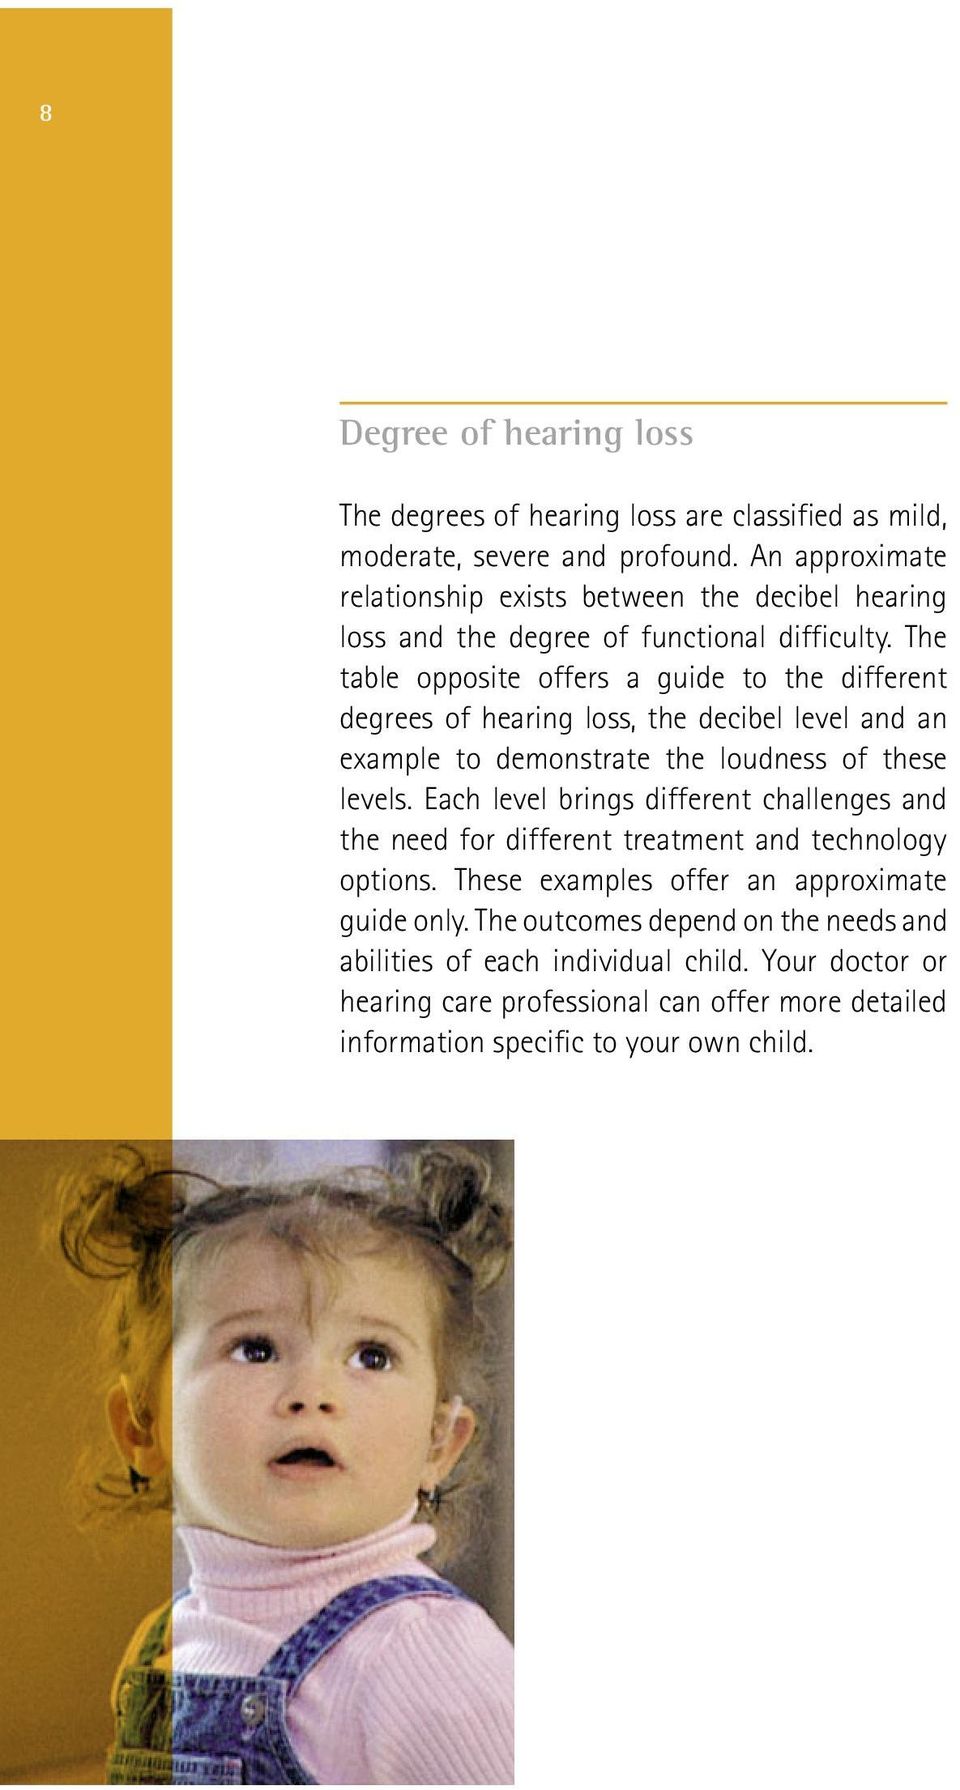 The table opposite offers a guide to the different degrees of hearing loss, the decibel level and an example to demonstrate the loudness of these levels.